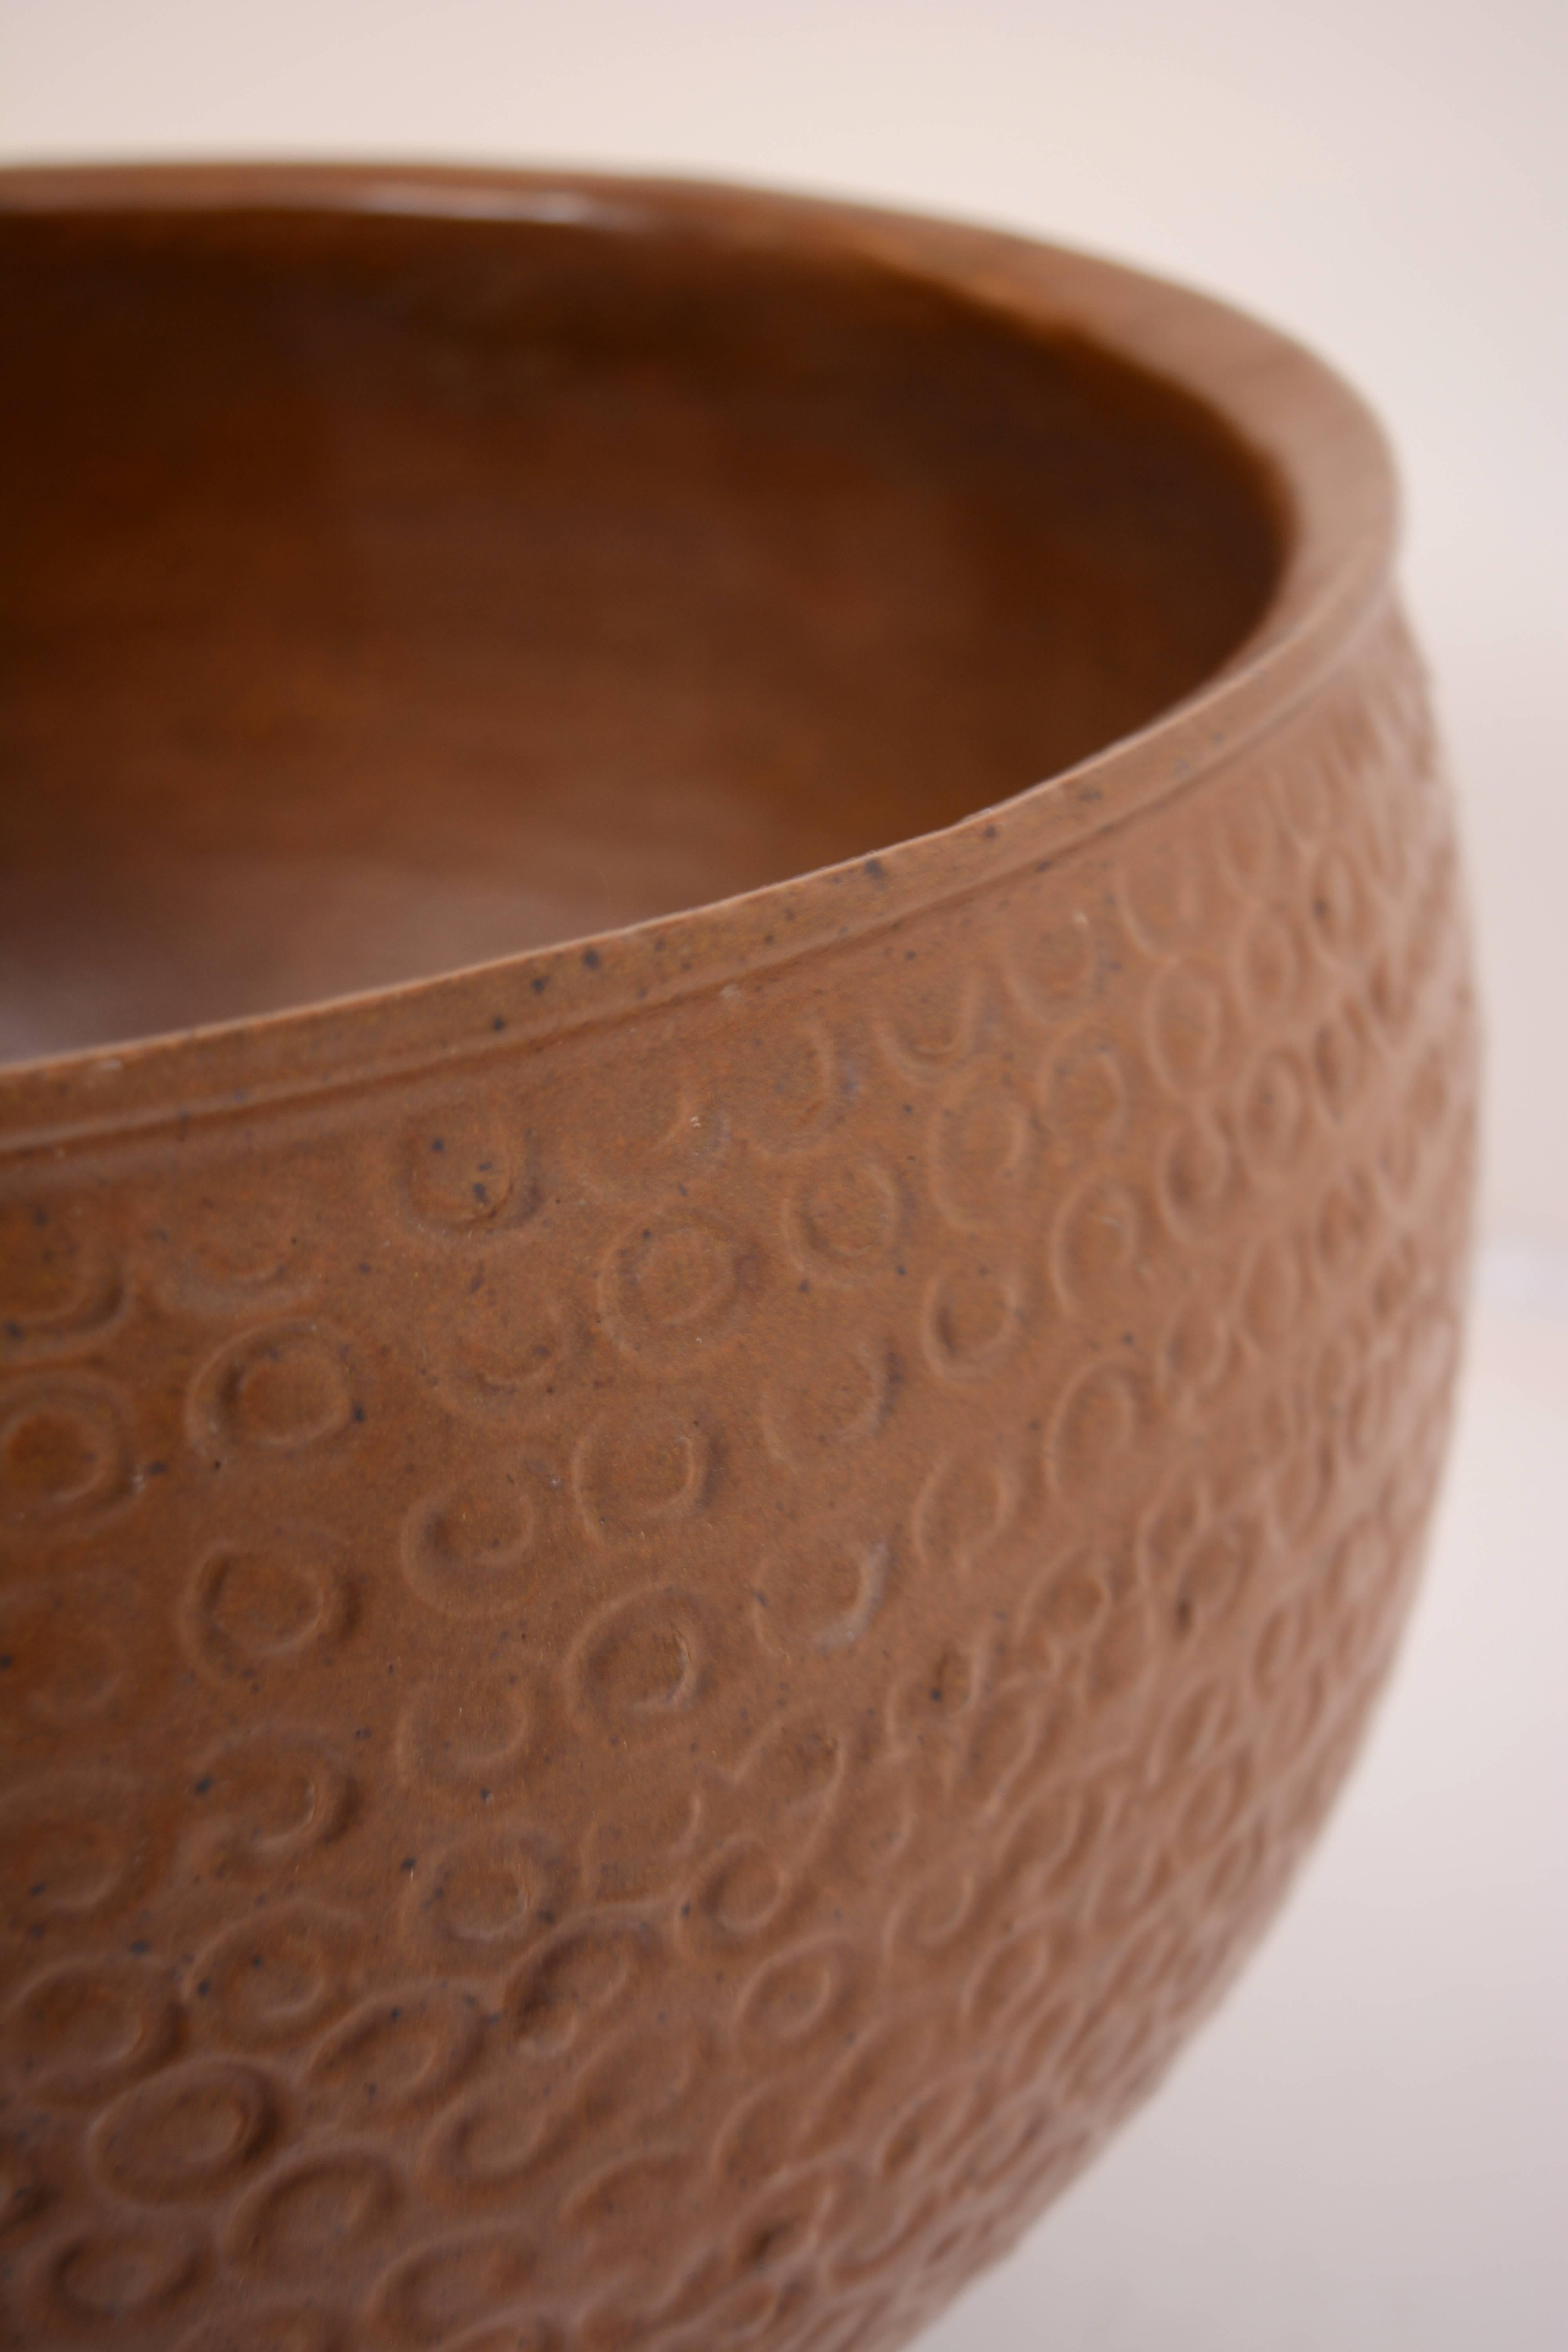 Mid-Century Modern Large Cheerio Planter by David Cressey for Architectural Pottery For Sale